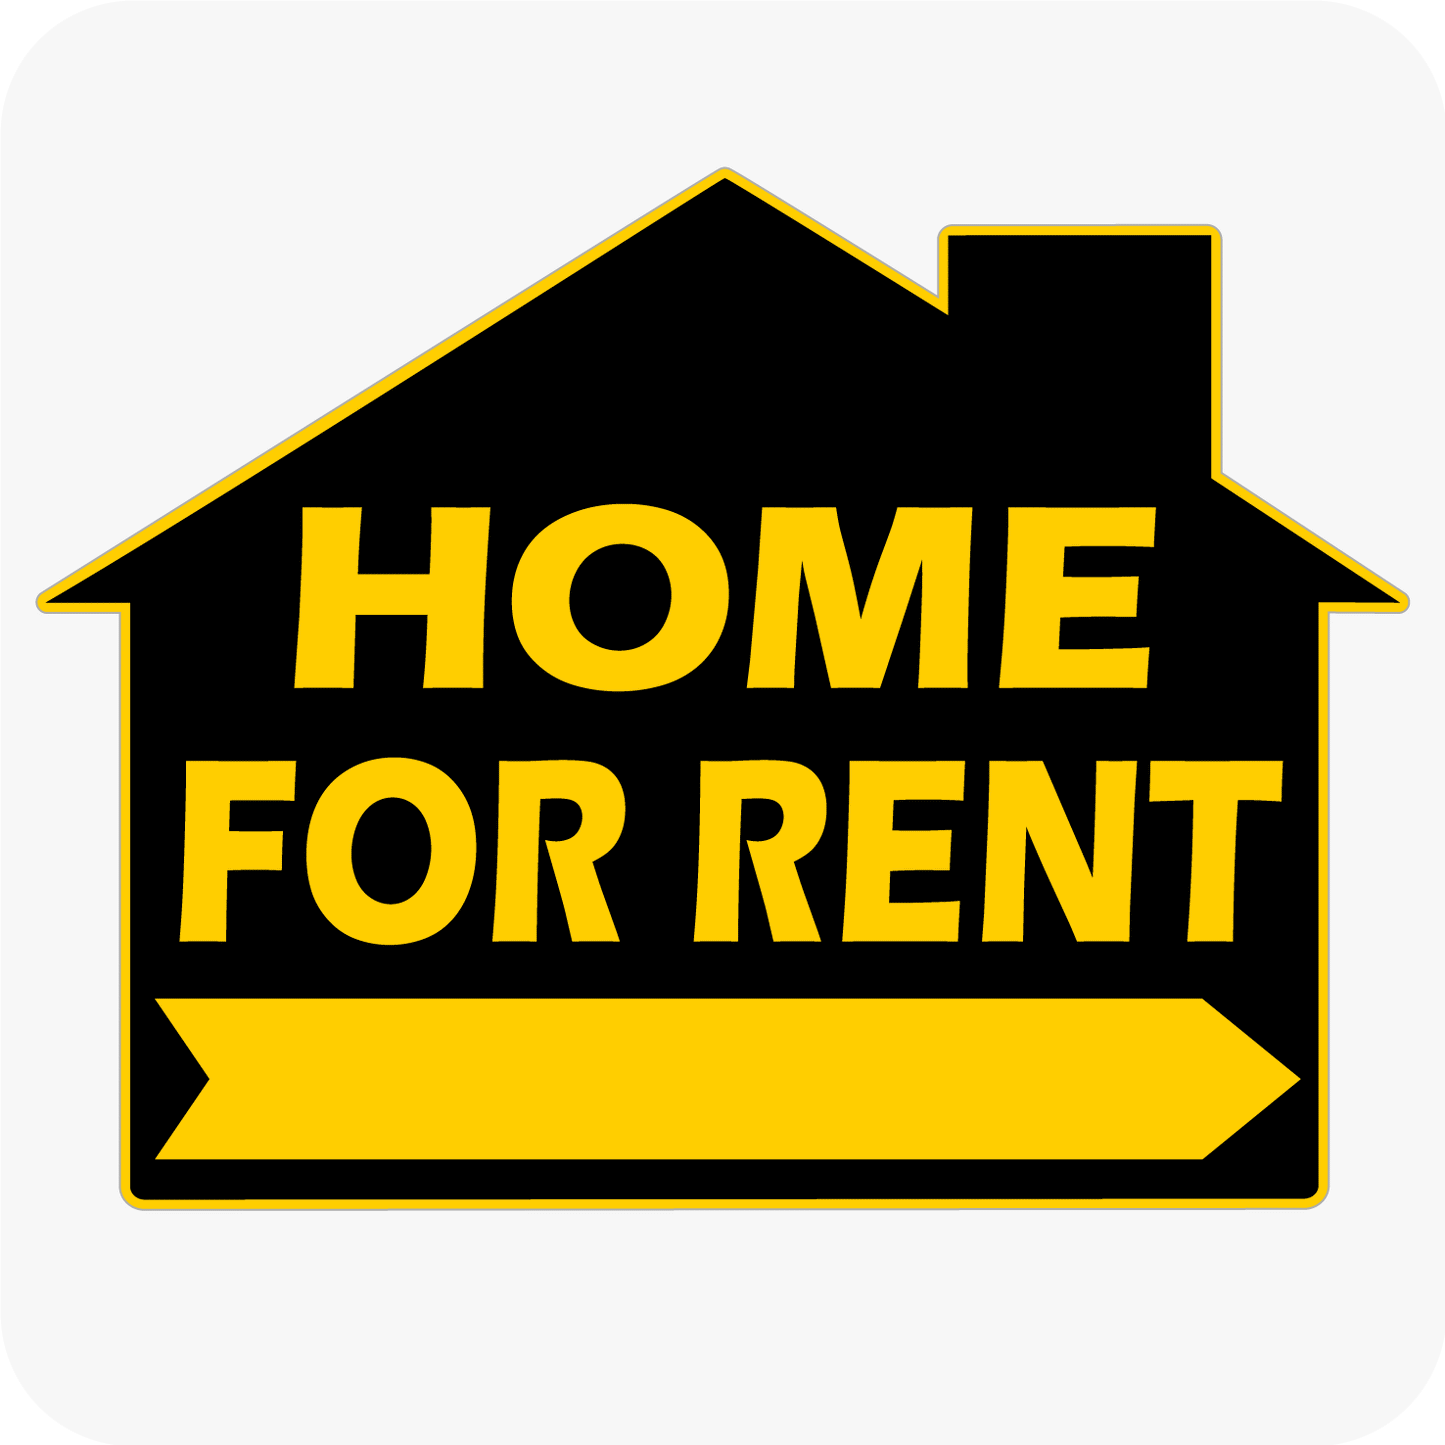 Home For Rent - House Shaped Sign 18x24 - Black and Yellow